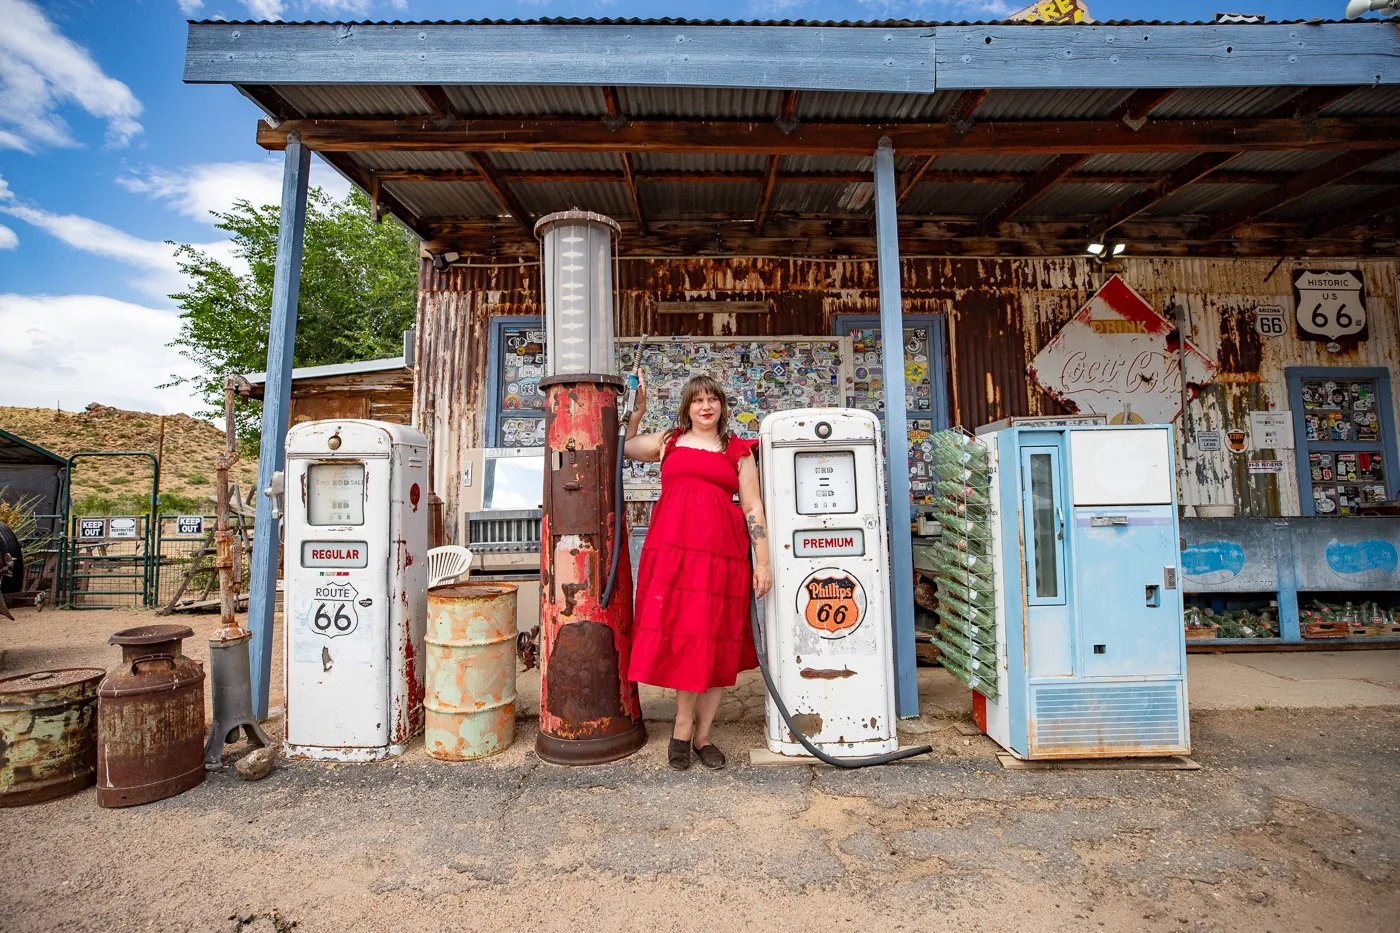 Vintage Gas pumps at Hackberry General Store in Kingman, Arizona Route 66 Roadside Attraction and Souvenir Shop